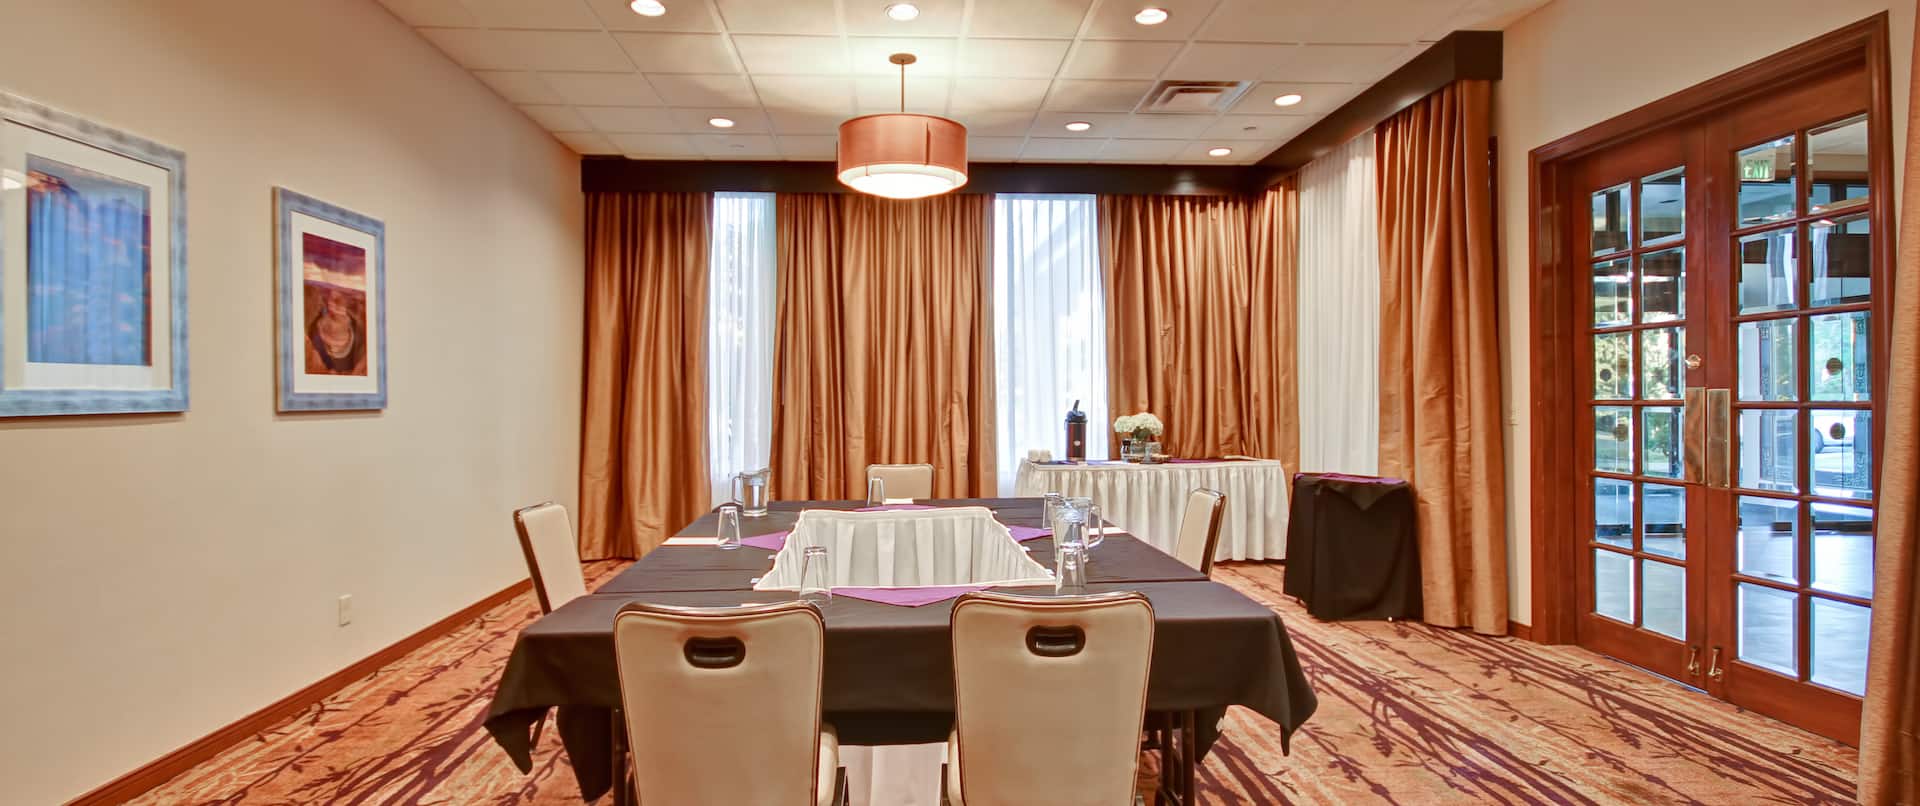 Wall Art, Table With Closed Drapes, Glass Entry Door, Drinking Glasses, and Napkins on Table With Black Linens, Refreshment Table in Meeting Room  